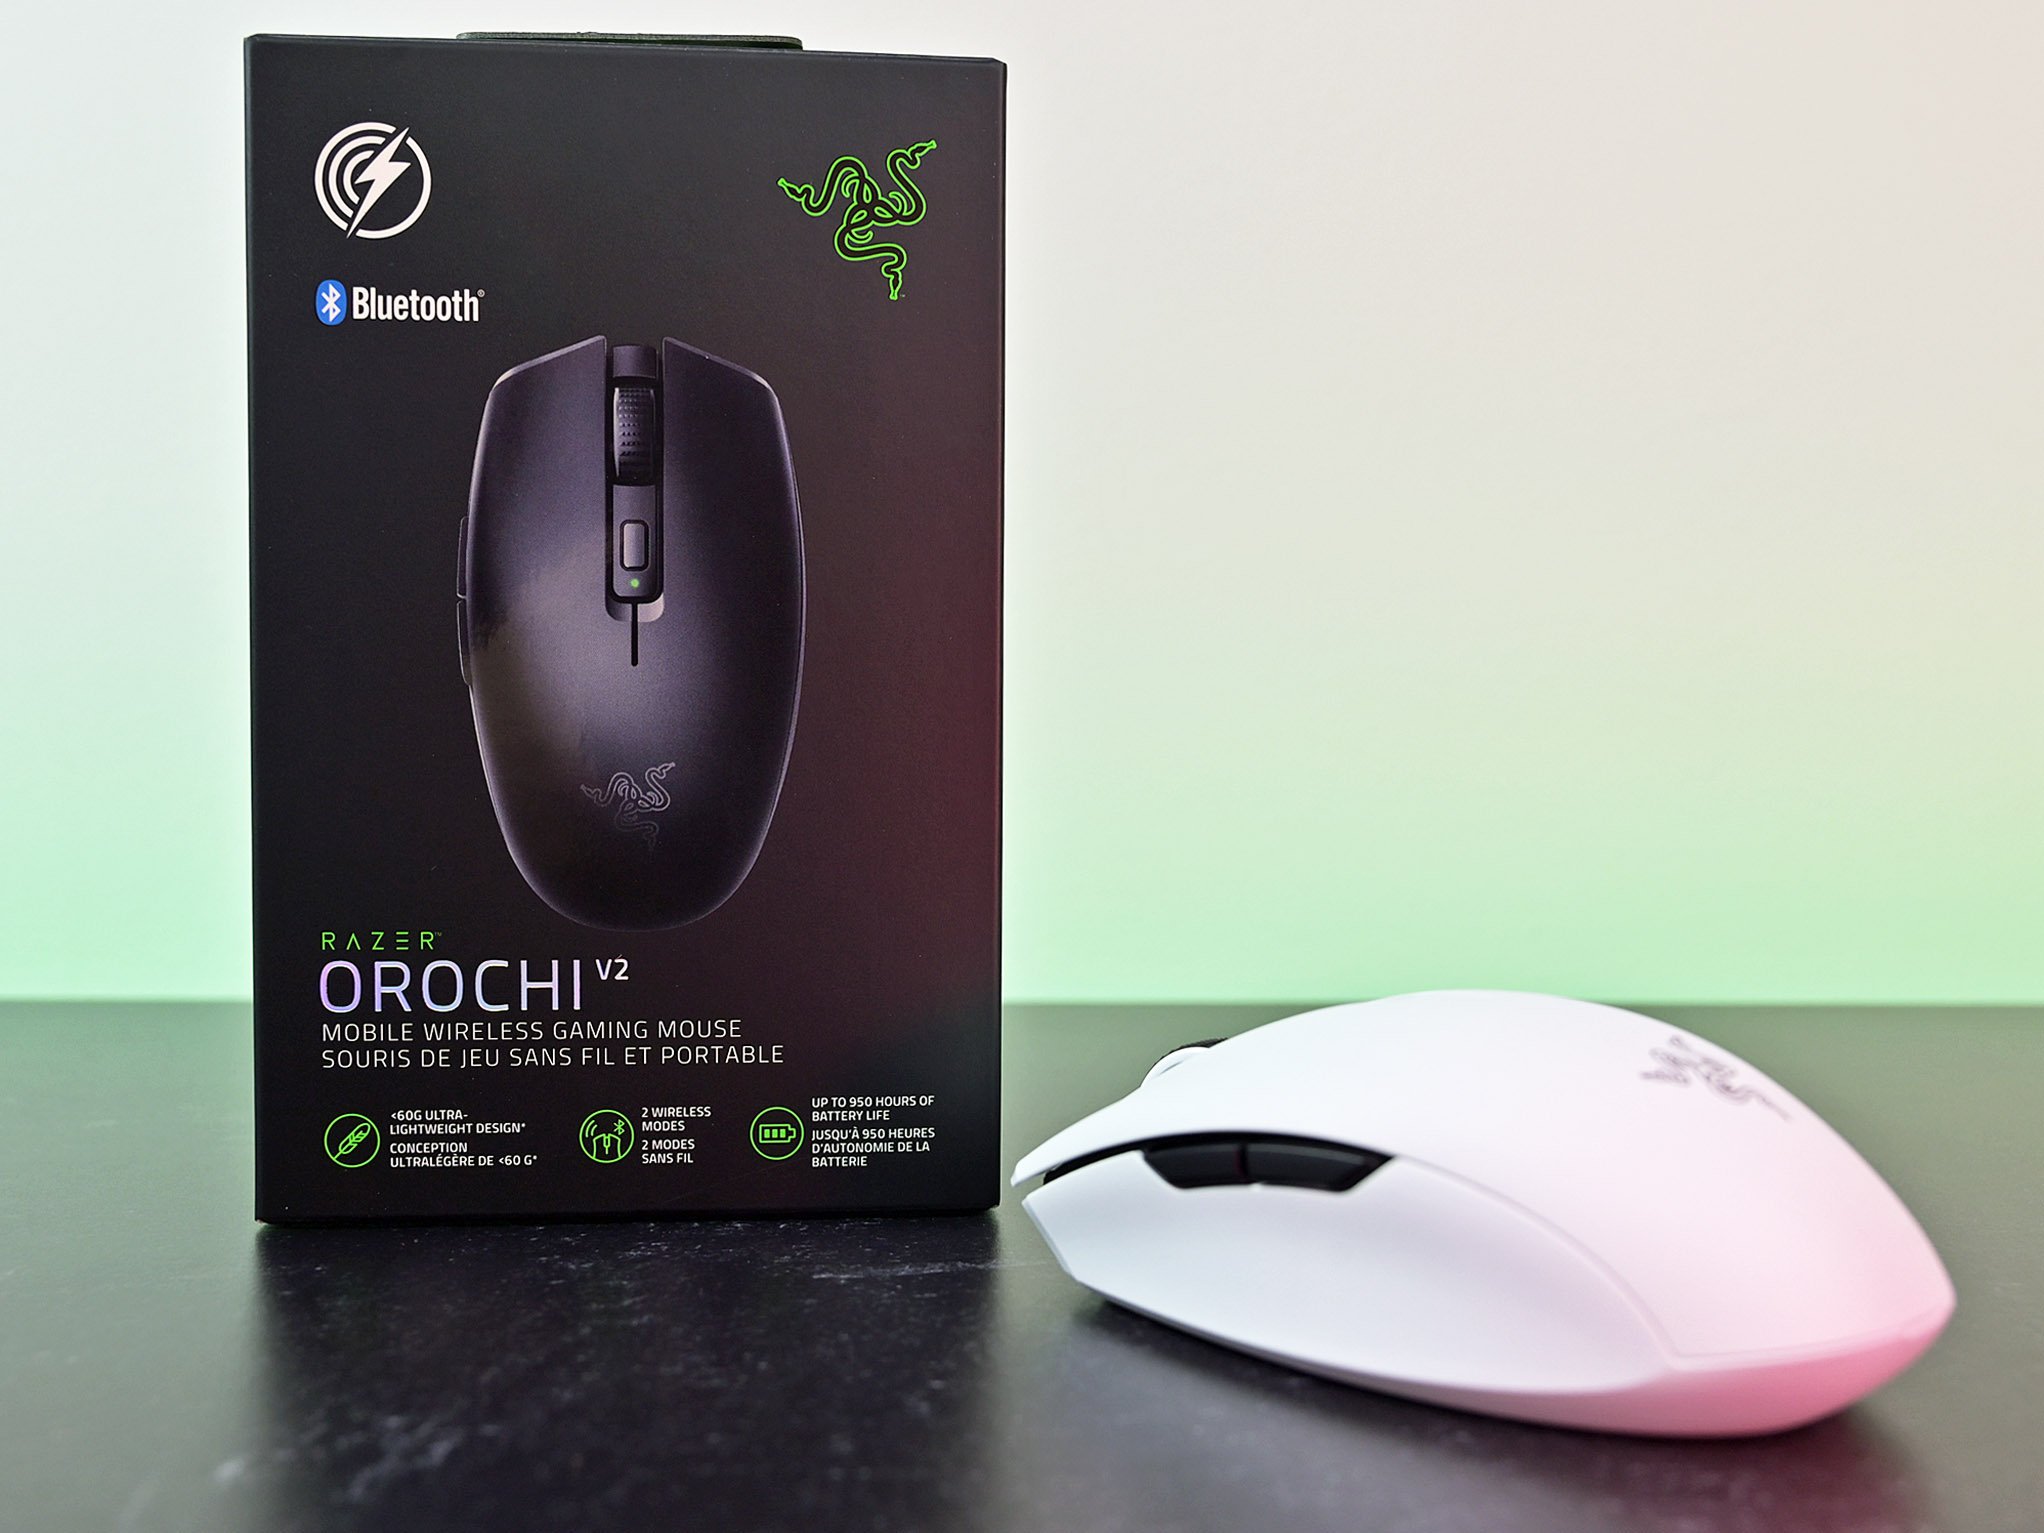 Razer's Orochi V2 gaming mouse gets over 900 hours of battery life